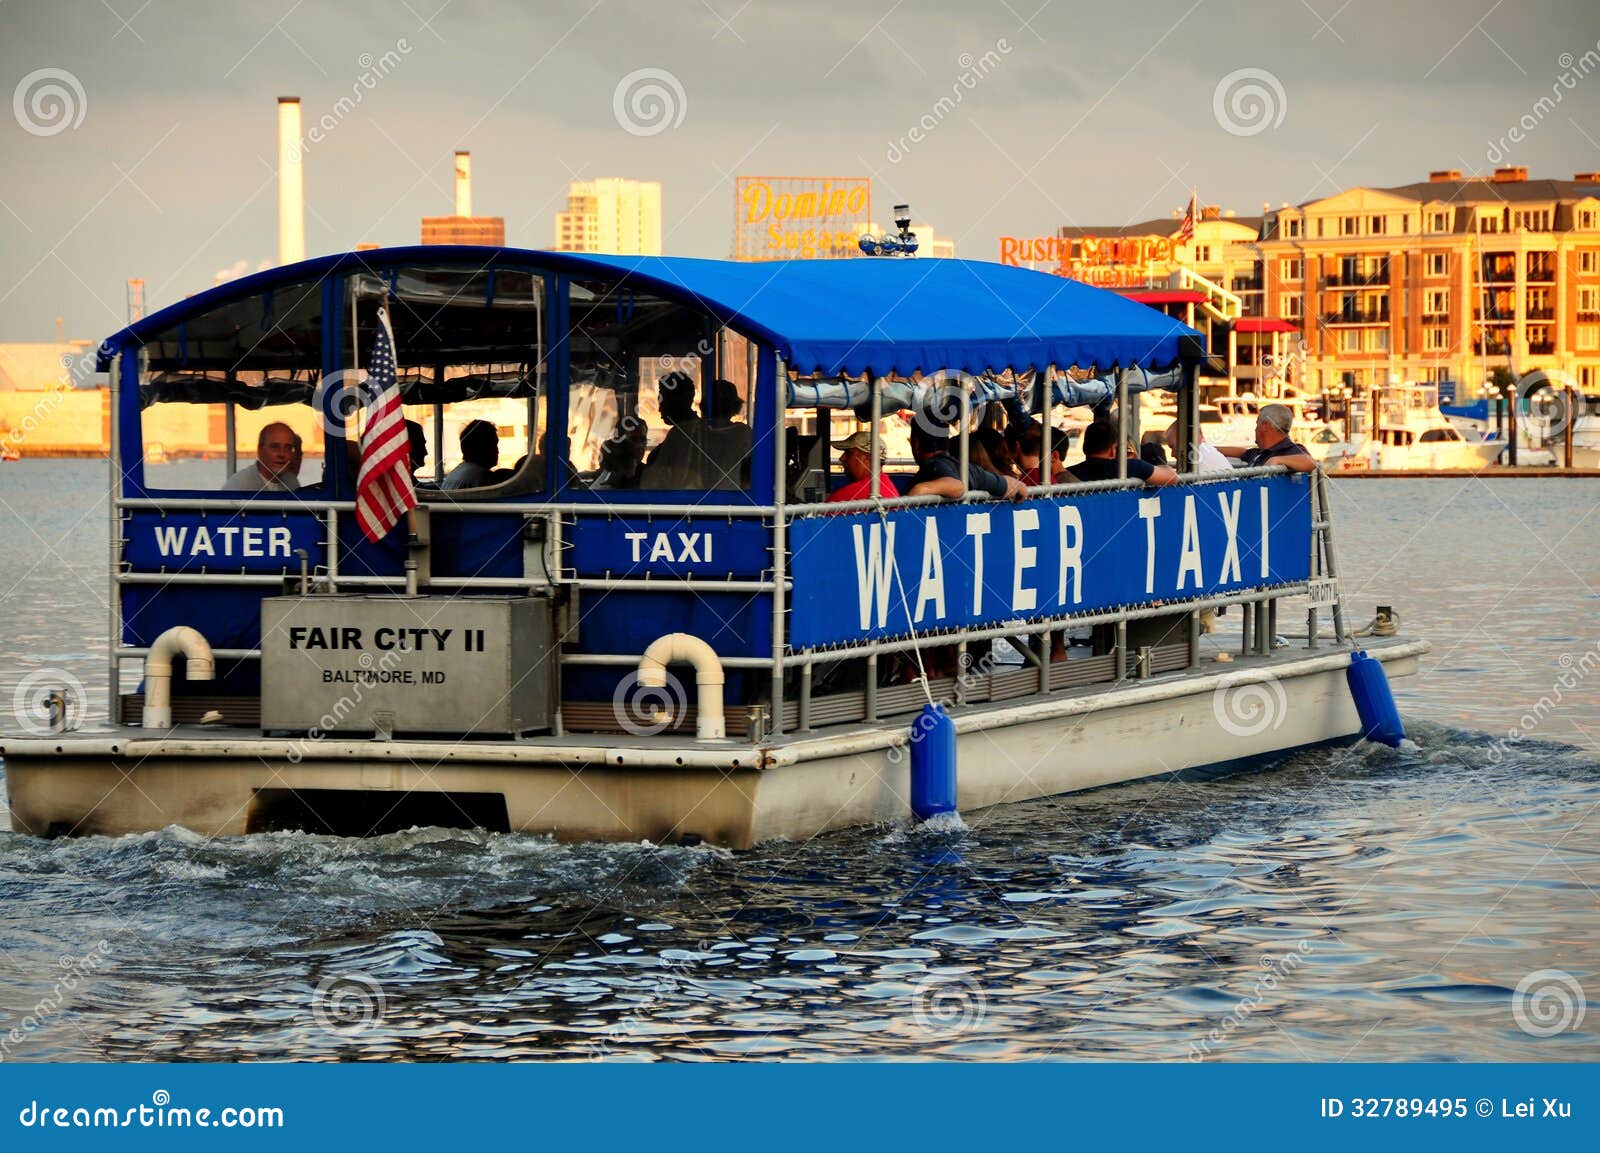 Baltimore, MD Fair City II Water Taxi Editorial Image